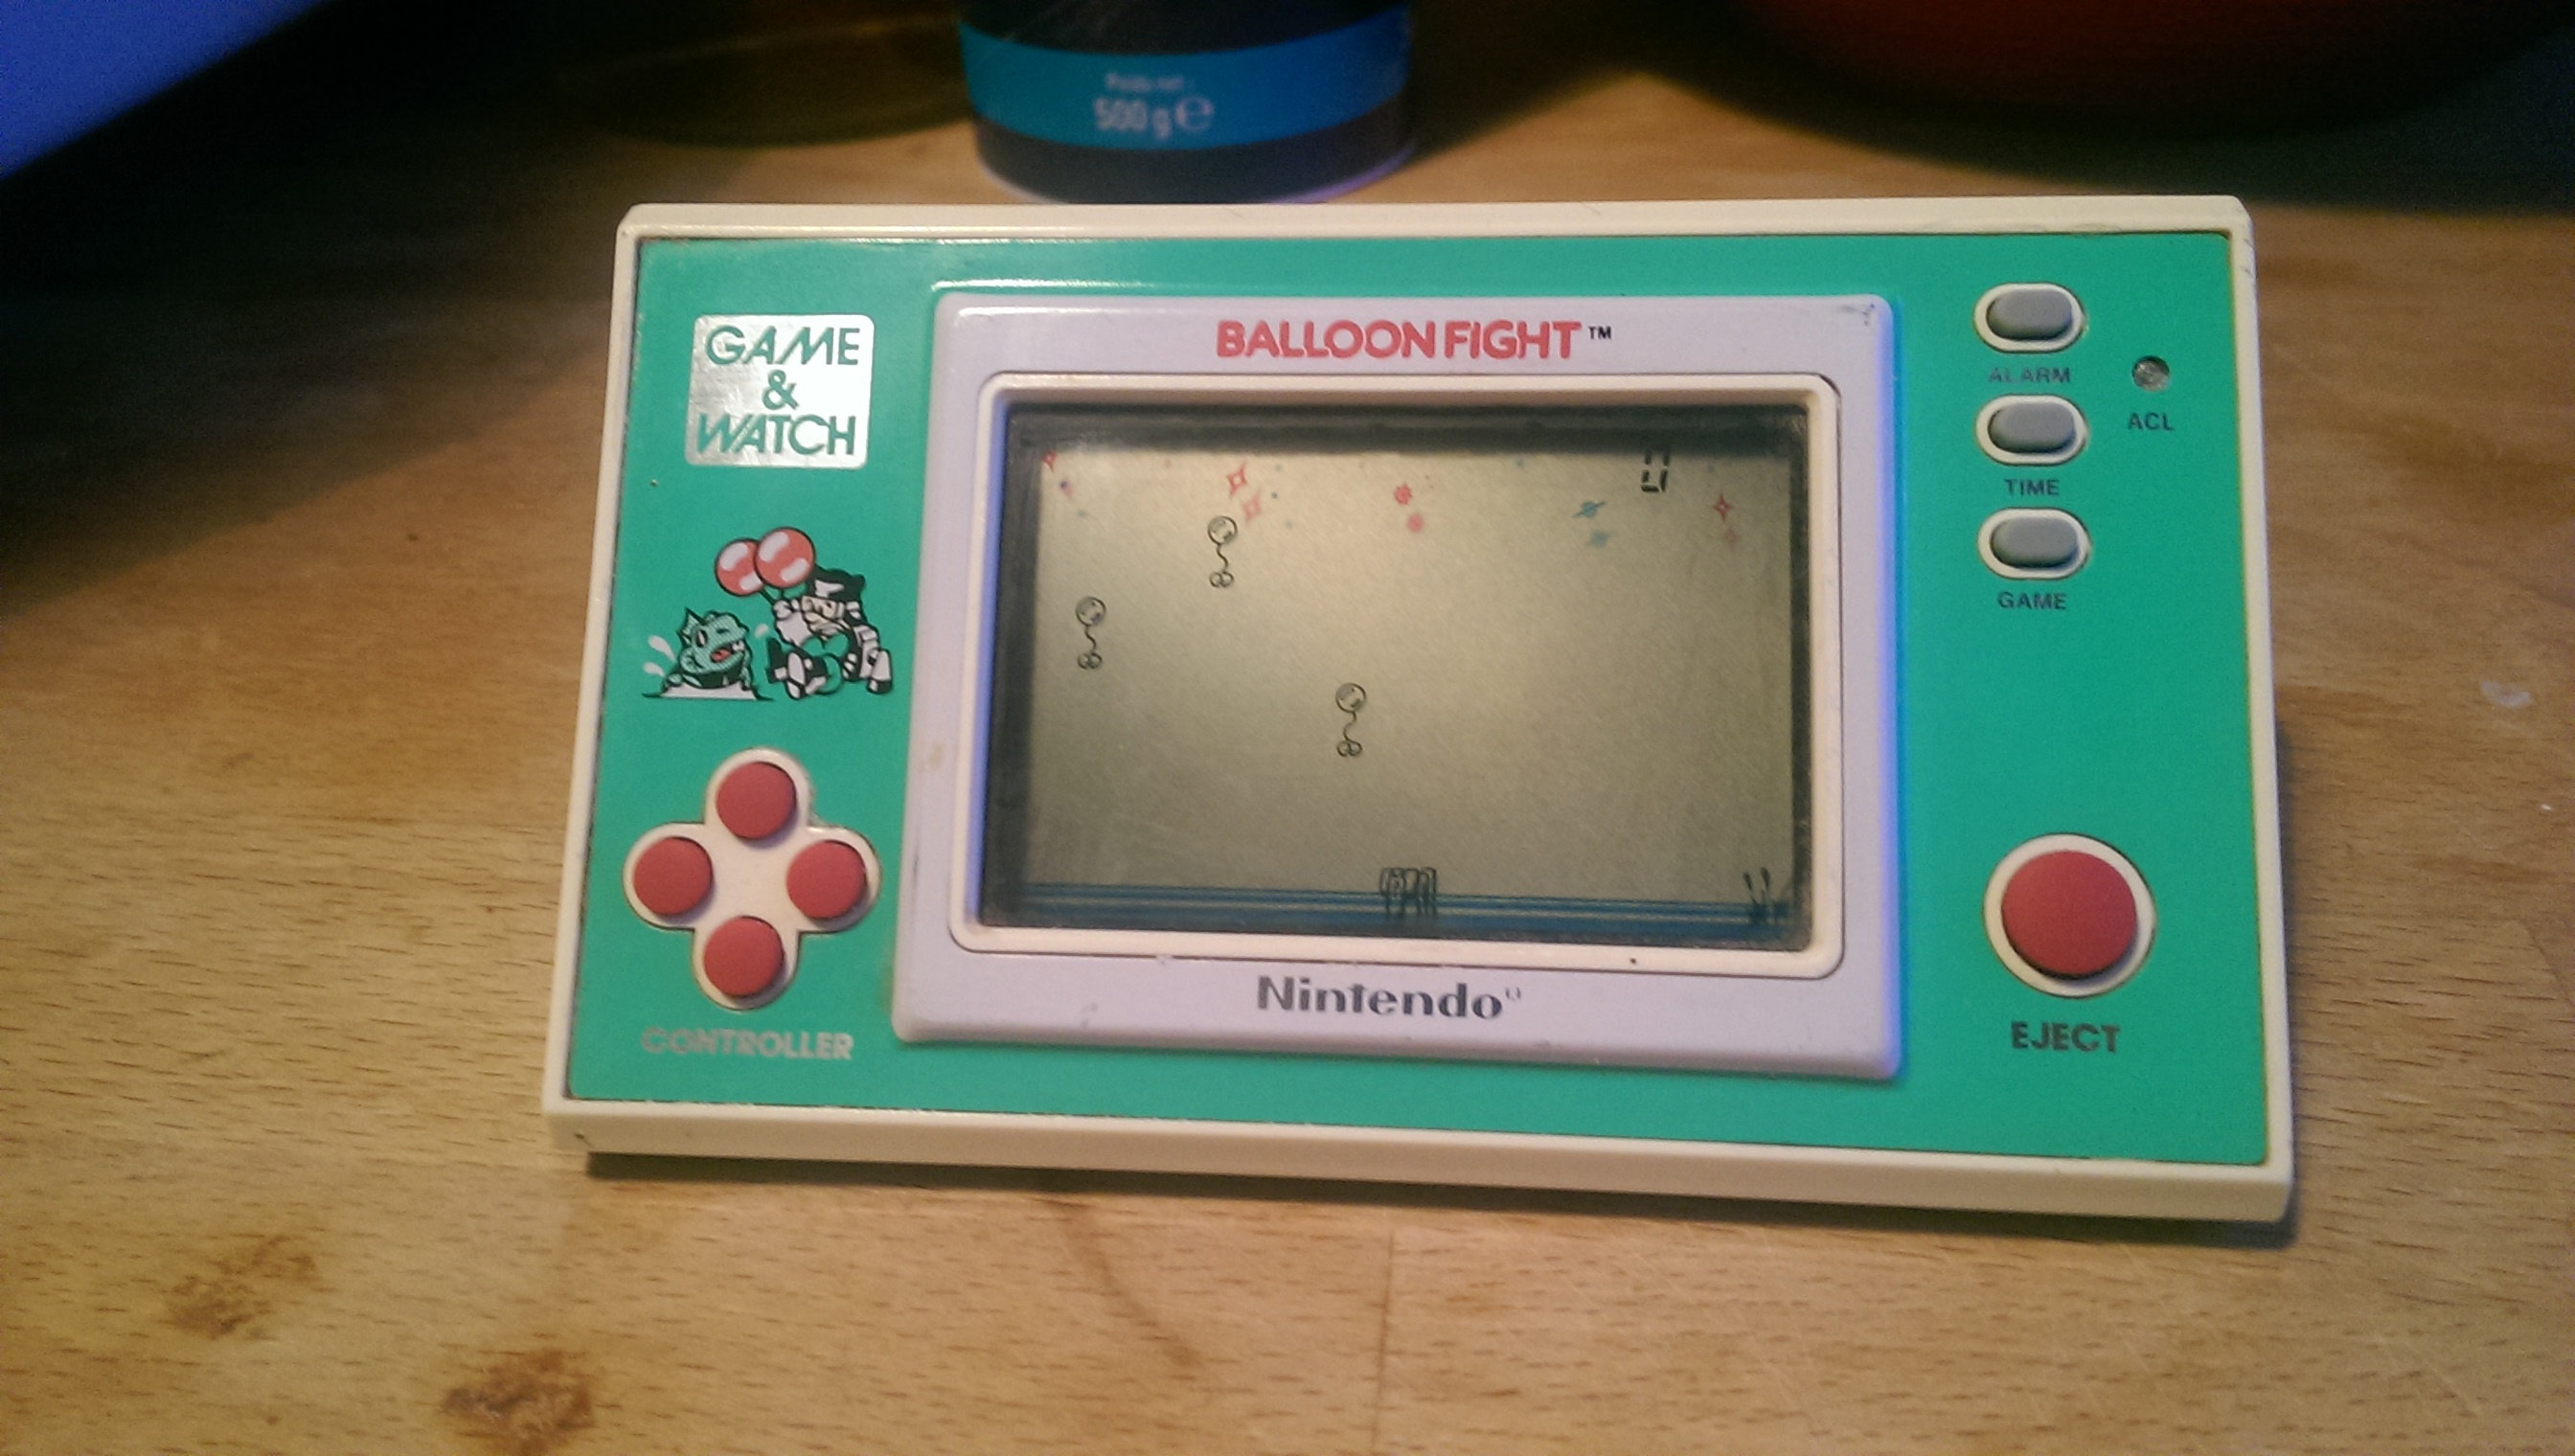 [CLOSED] game&watch Balloon fight Y8yy